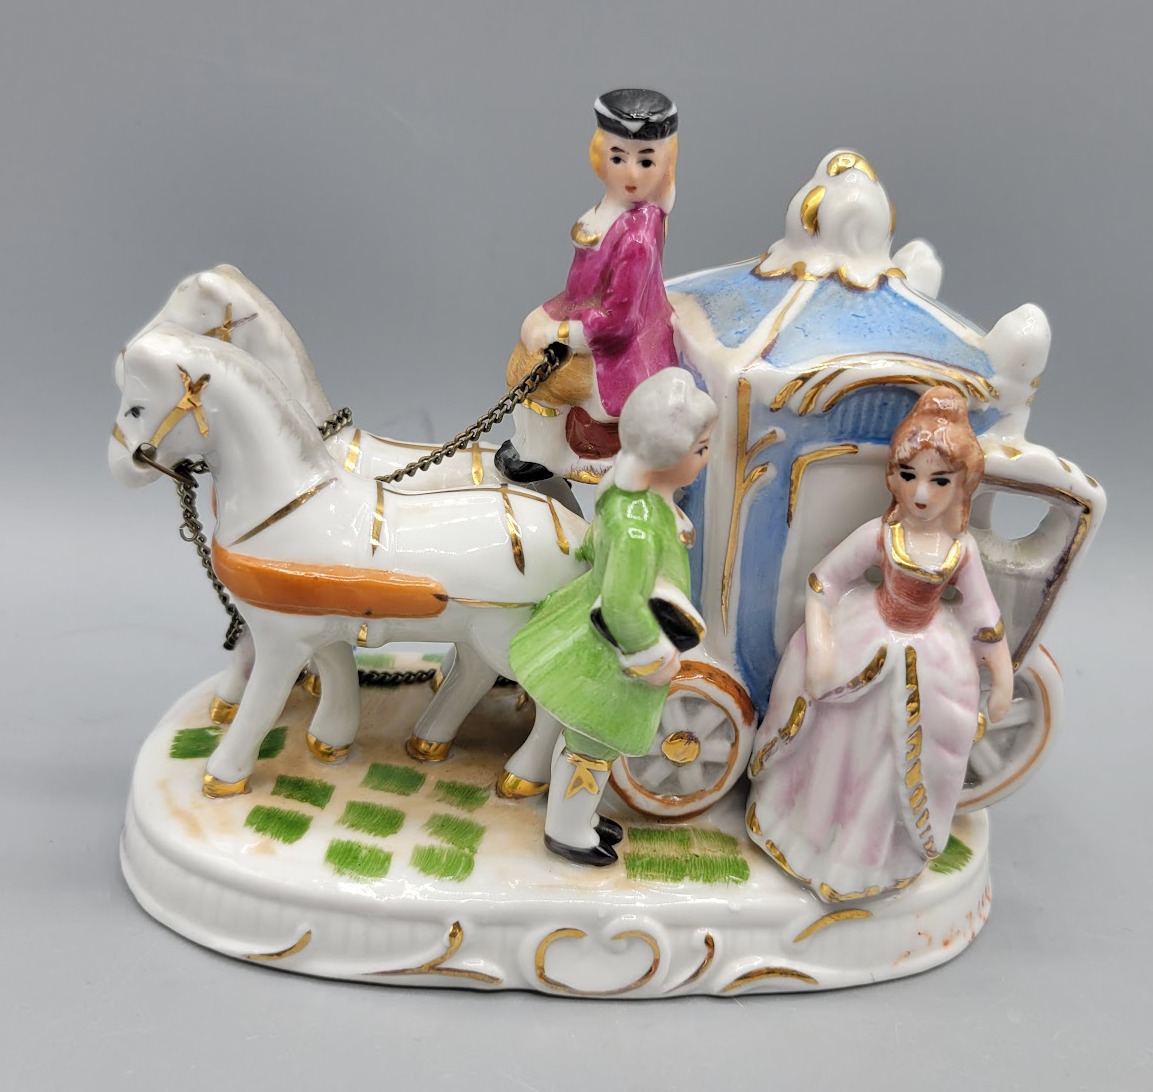 ANTIQUE GERMAN PORCELAIN FIGURINE HORSE CARRIAGE WITH PEOPLE GOLD GILT PAINTED